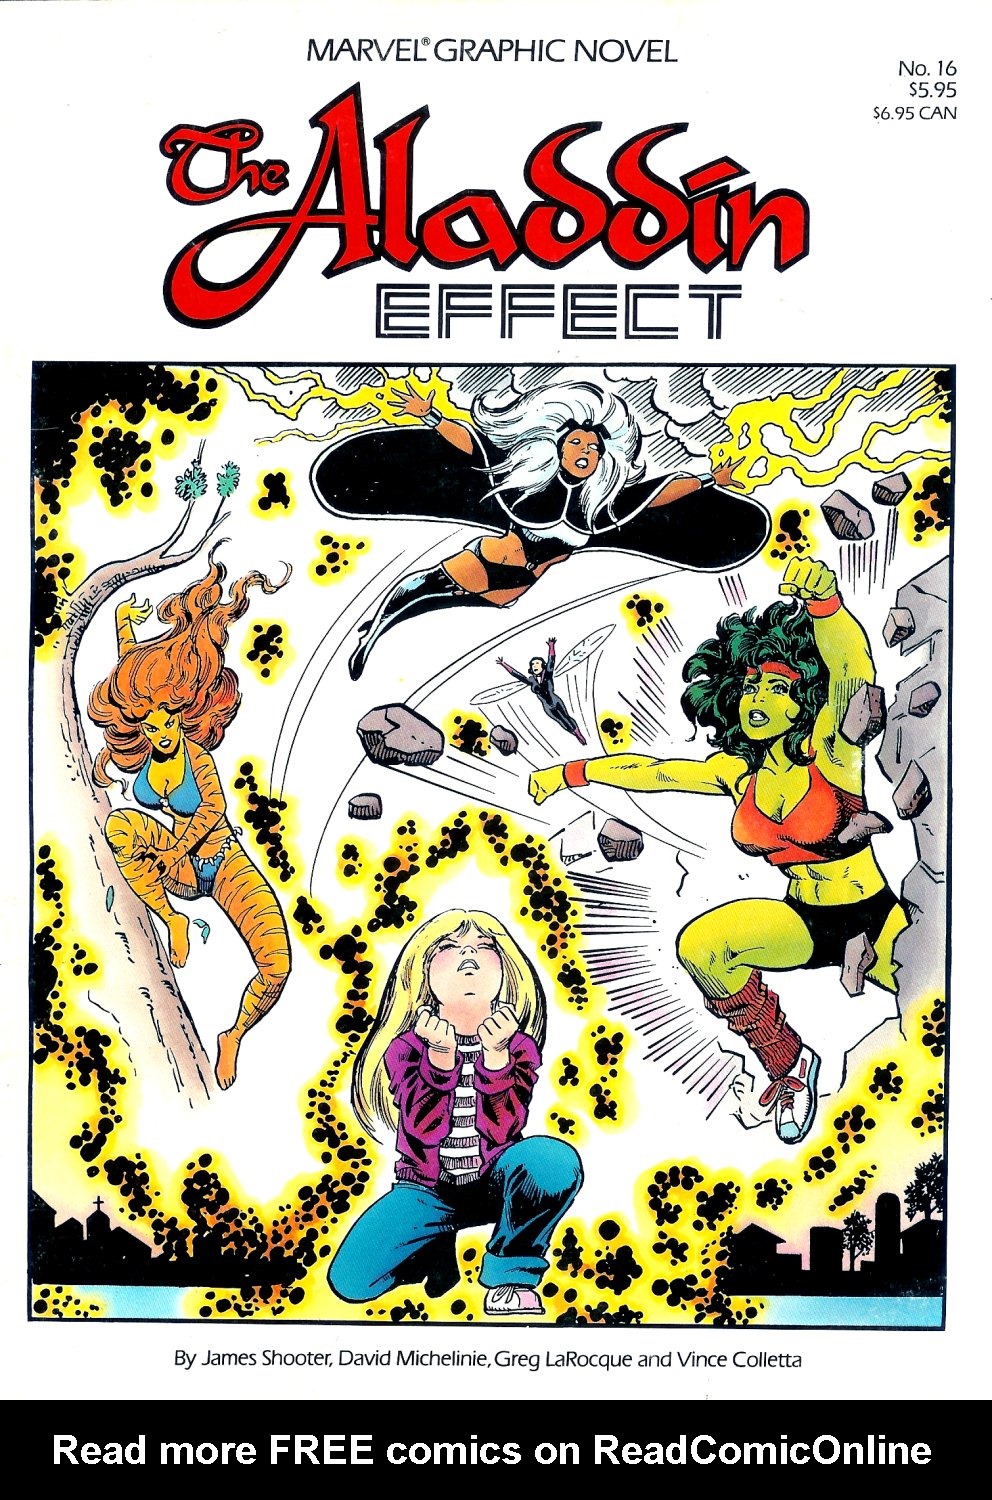 Read online Marvel Graphic Novel comic -  Issue #16 - The Aladdin Effect - 1